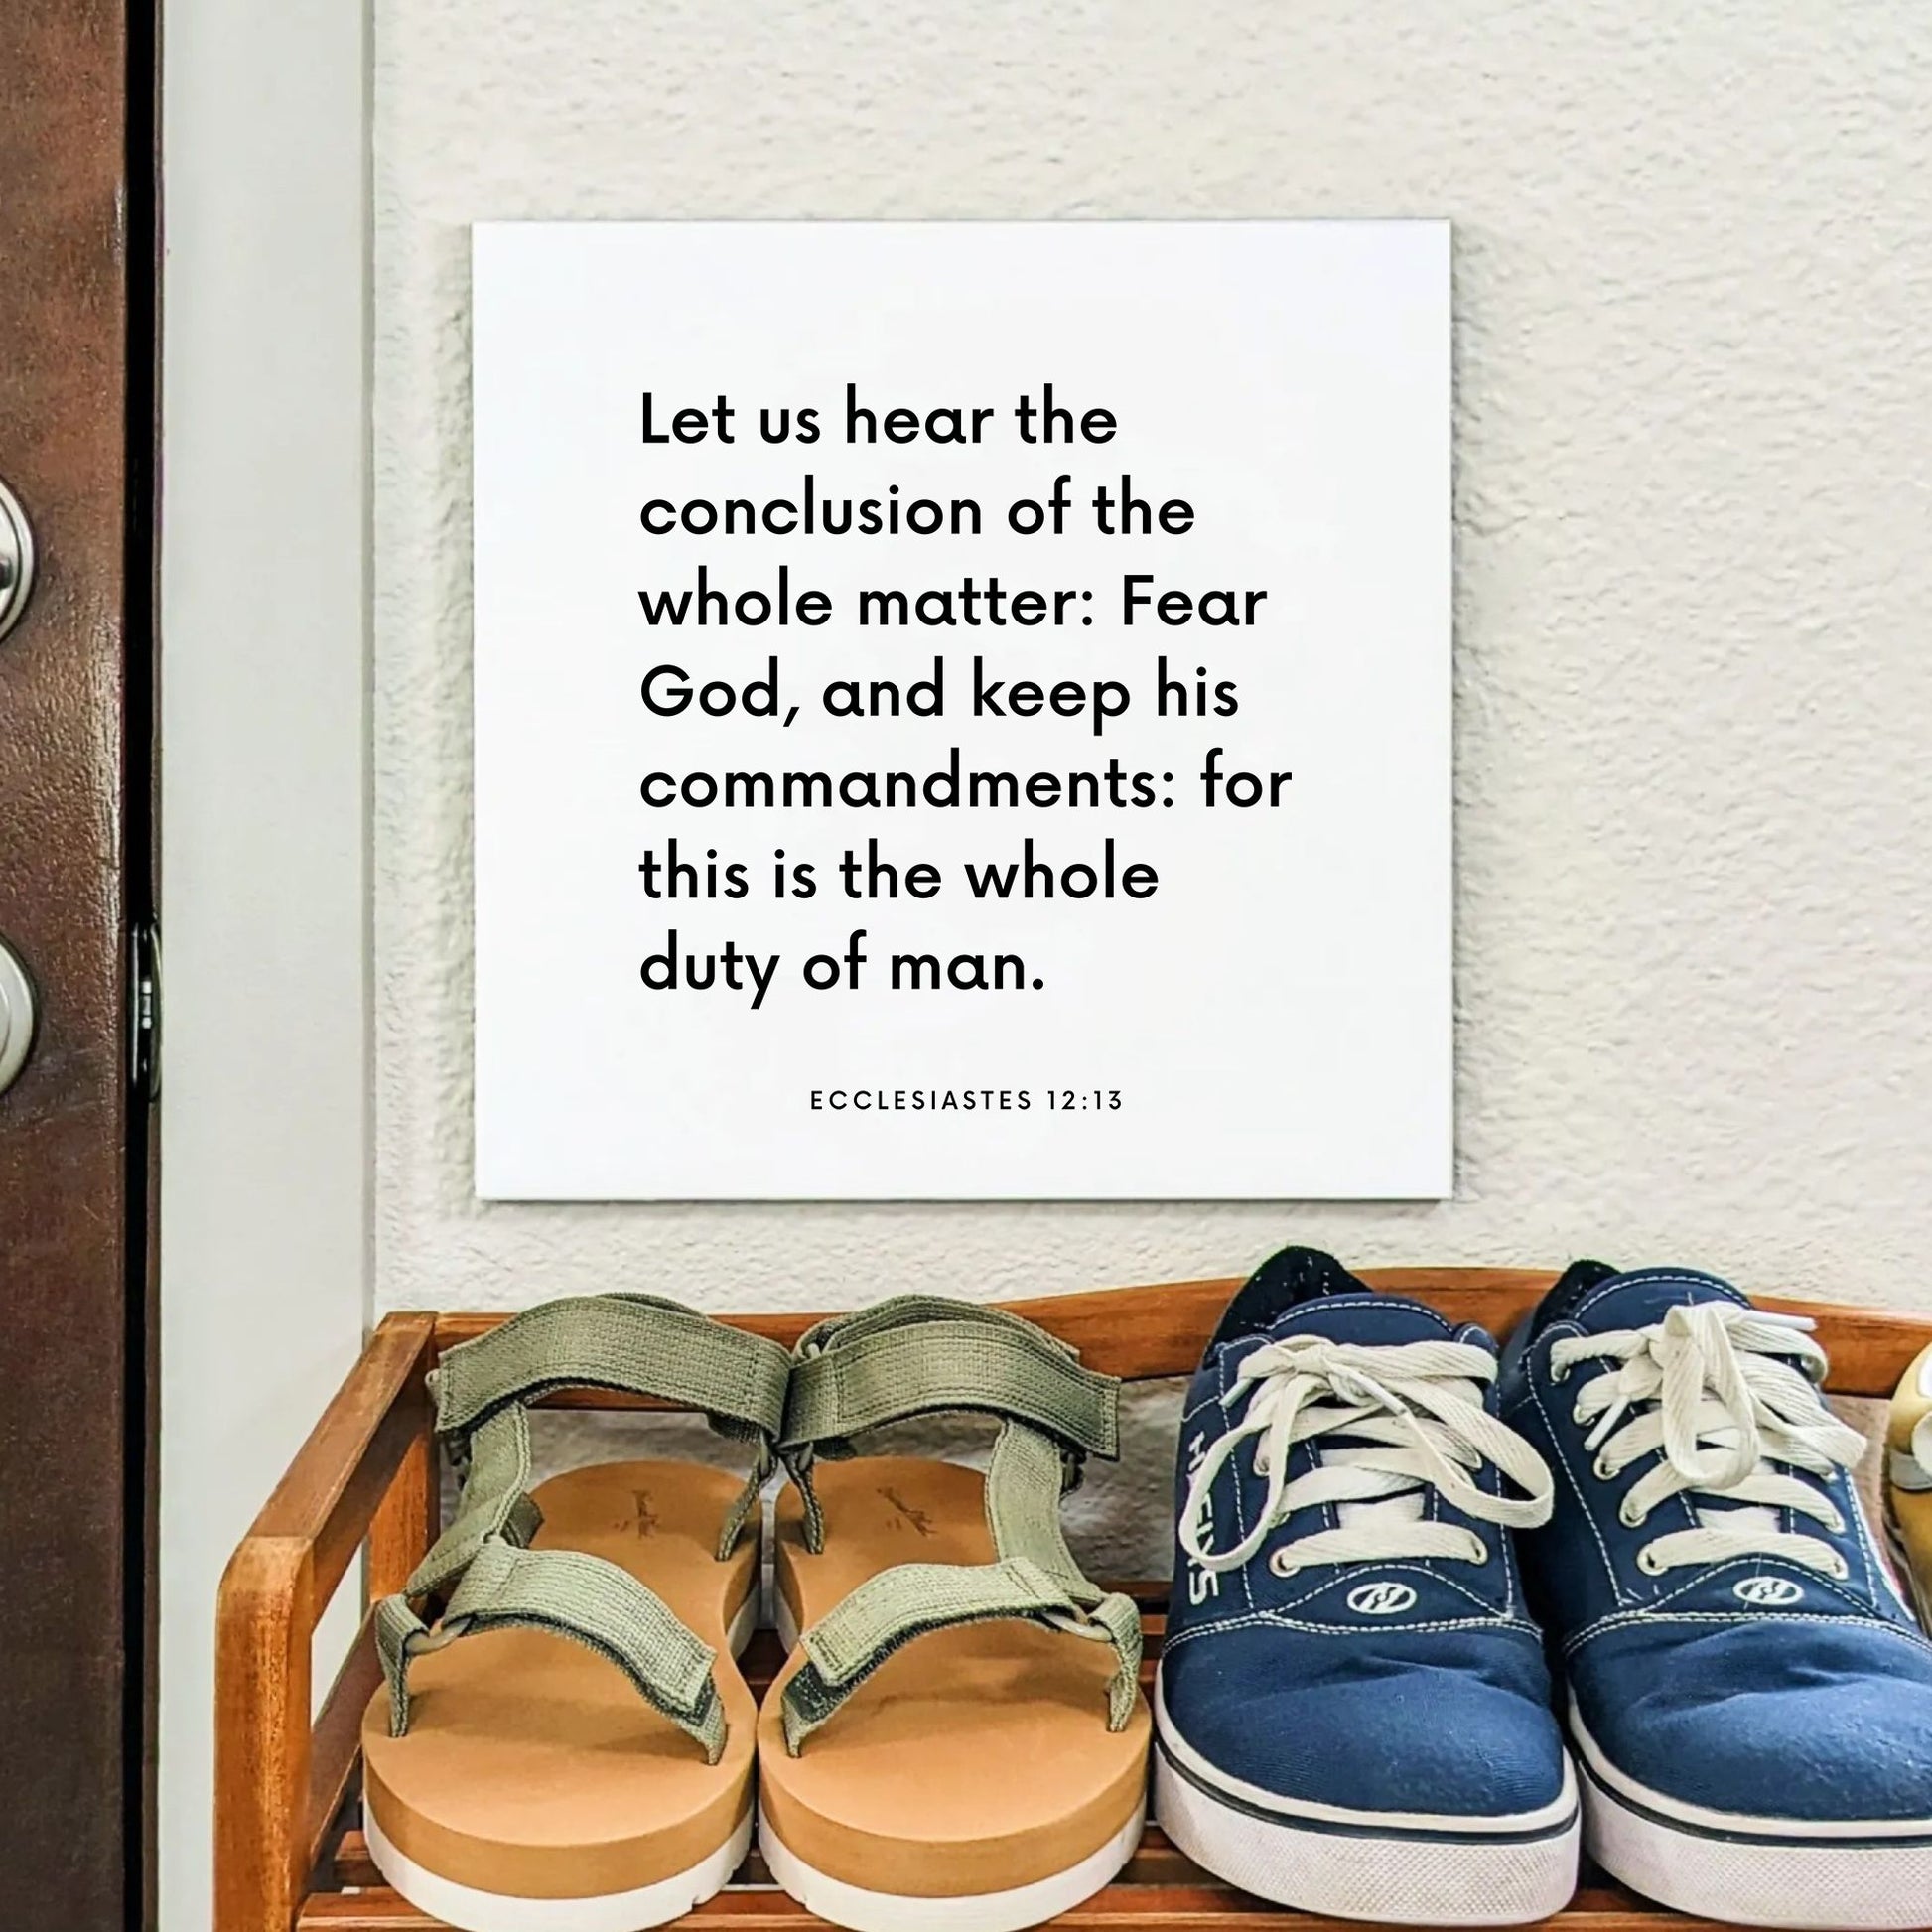 Shoes mouting of the scripture tile for Ecclesiastes 12:13 - "Let us hear the conclusion of the whole matter: Fear God"